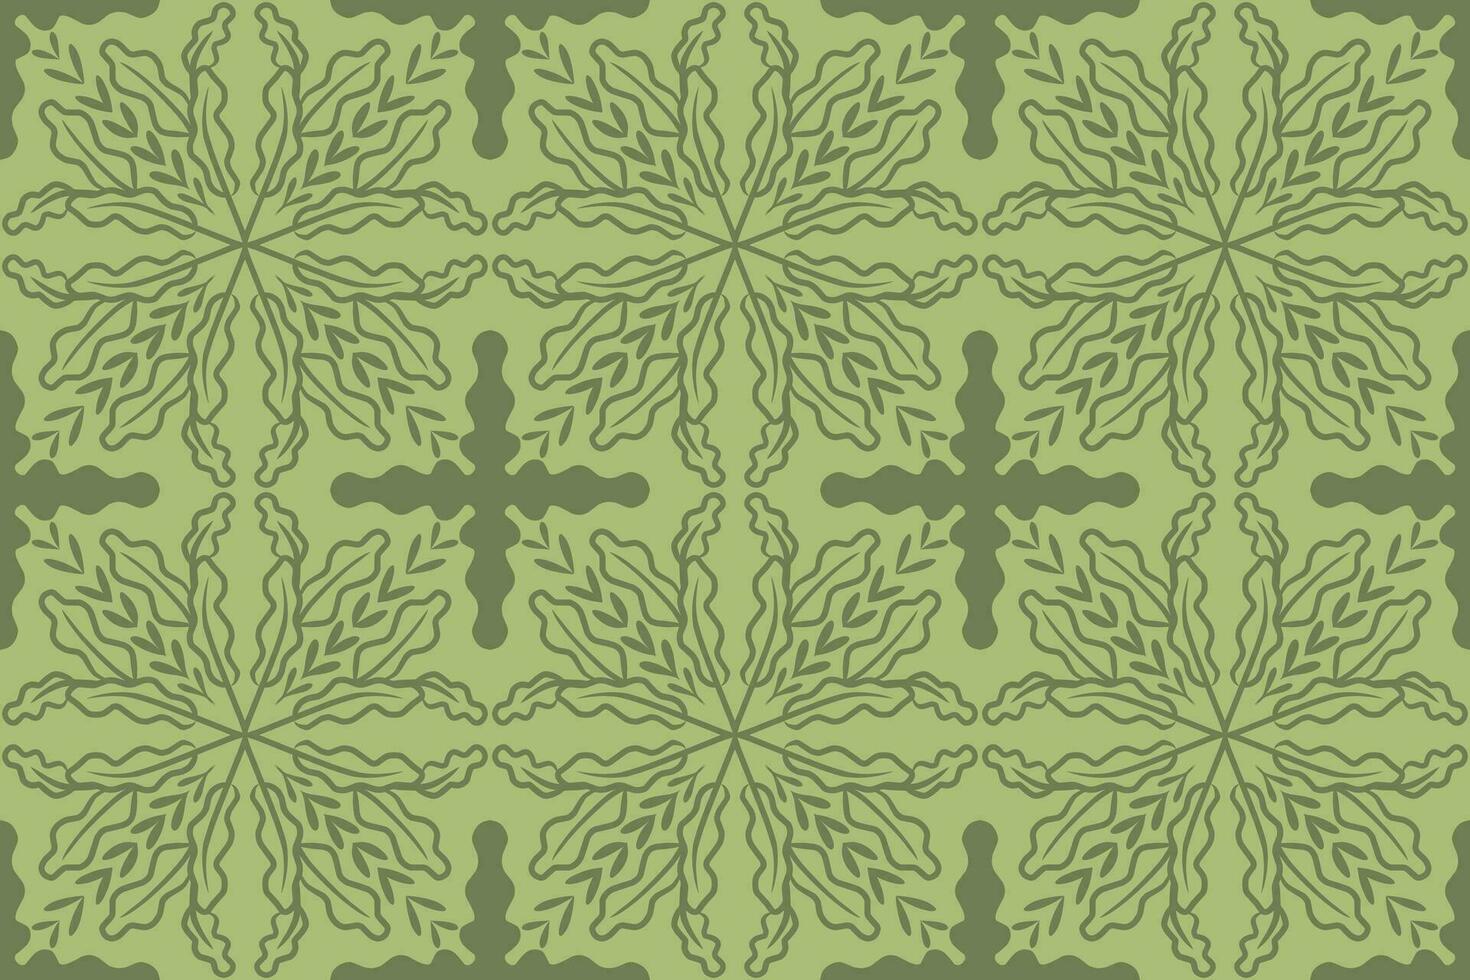 batik motif design, can be used for background or fabric design. This design can be connected repeatedly and will always connect vector